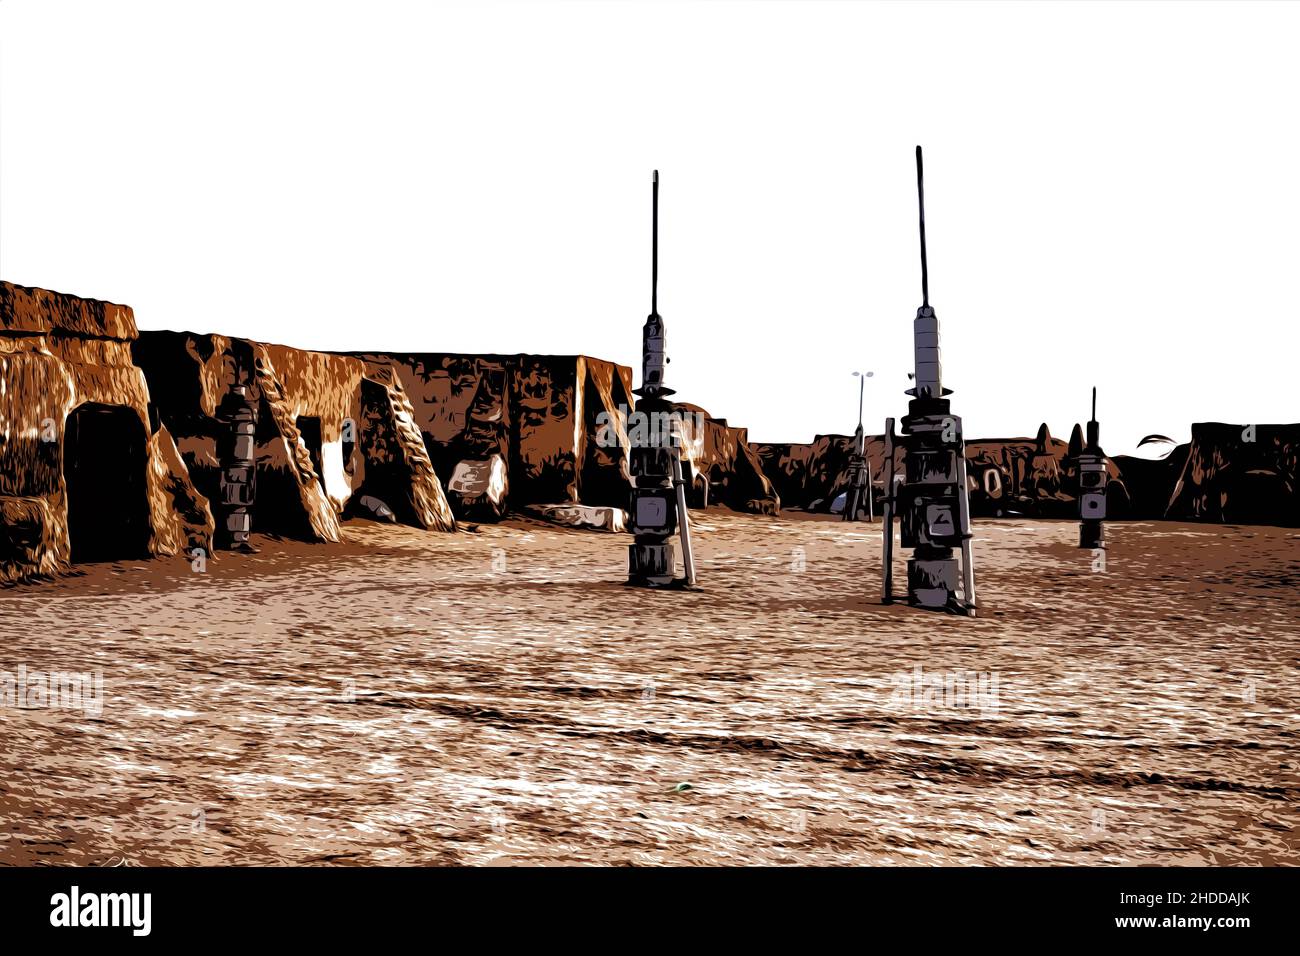 Illustration abandoned scenery of the planet Tatooine for the filming of Star Wars in the Sahara Desert Stock Photo